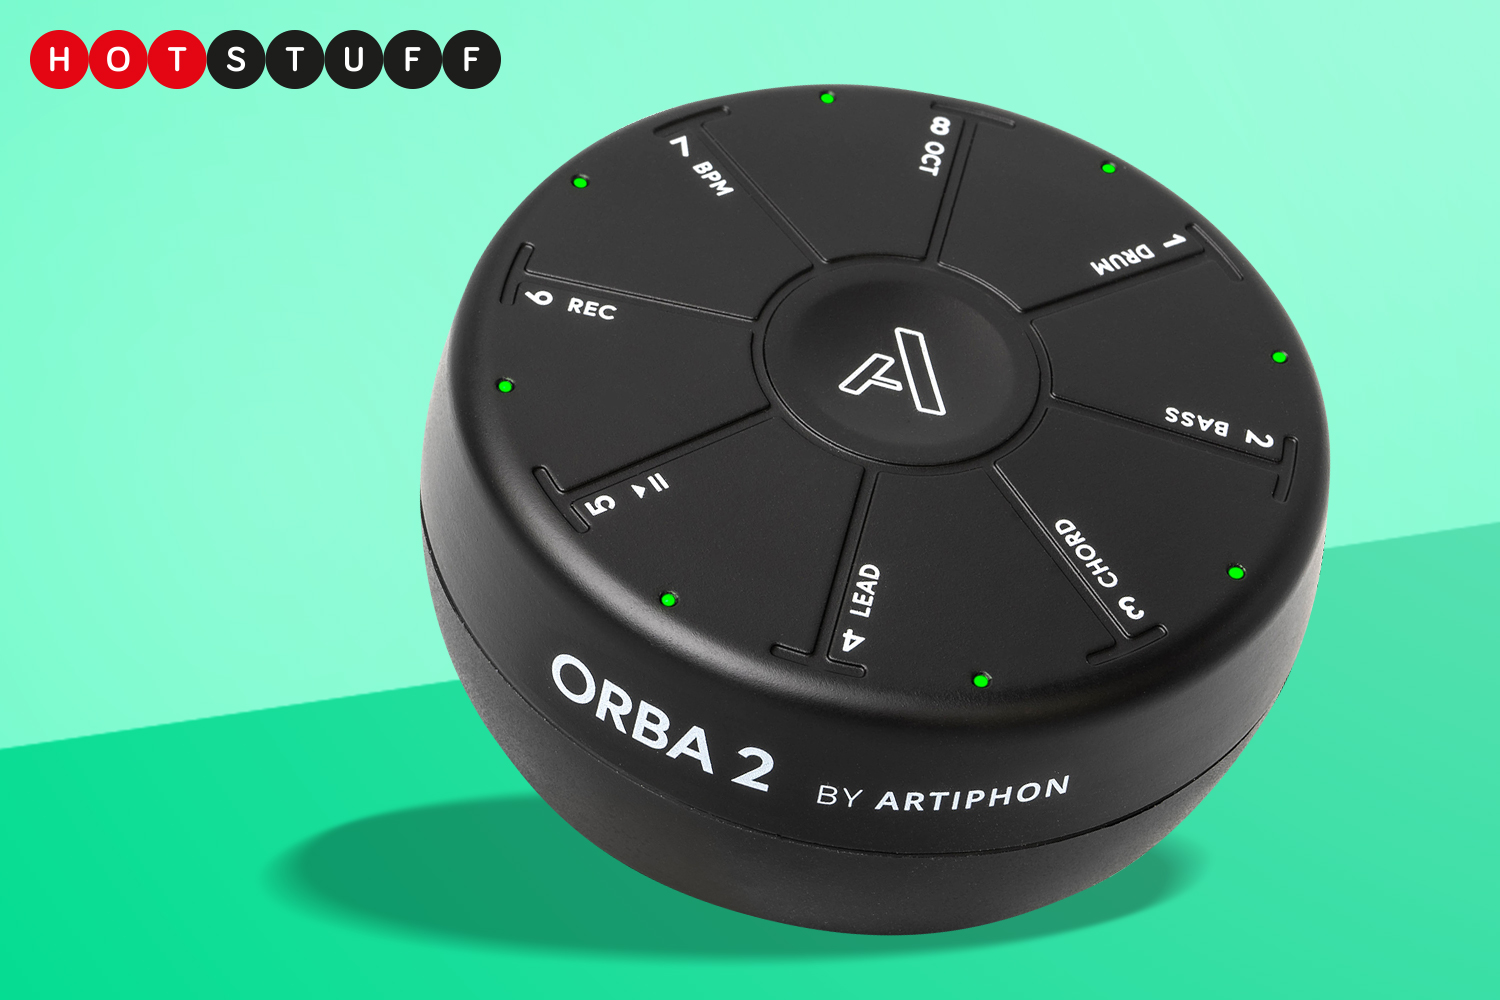 Craft sample-based hits anywhere with the Orba 2 techno-grapefruit | Stuff